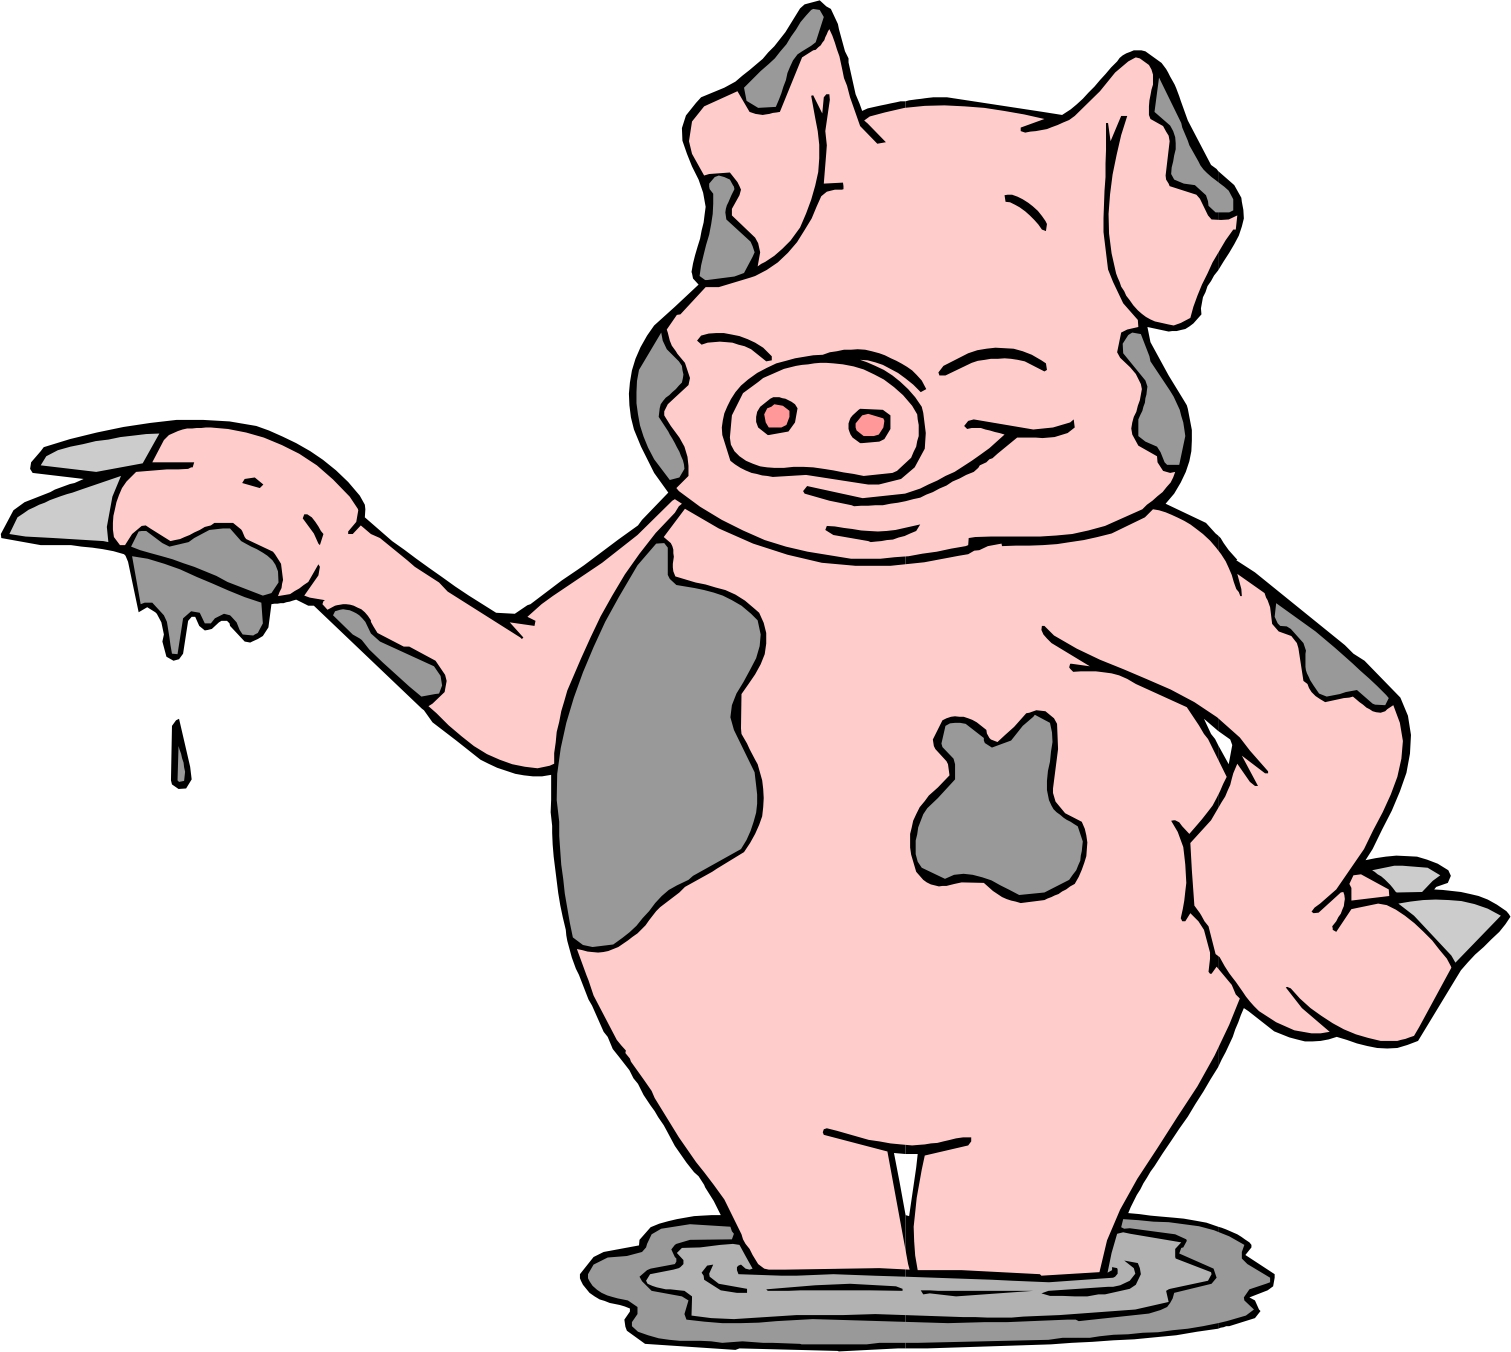 Cartoon Pig | Page 3 - Clipart library - Clipart library